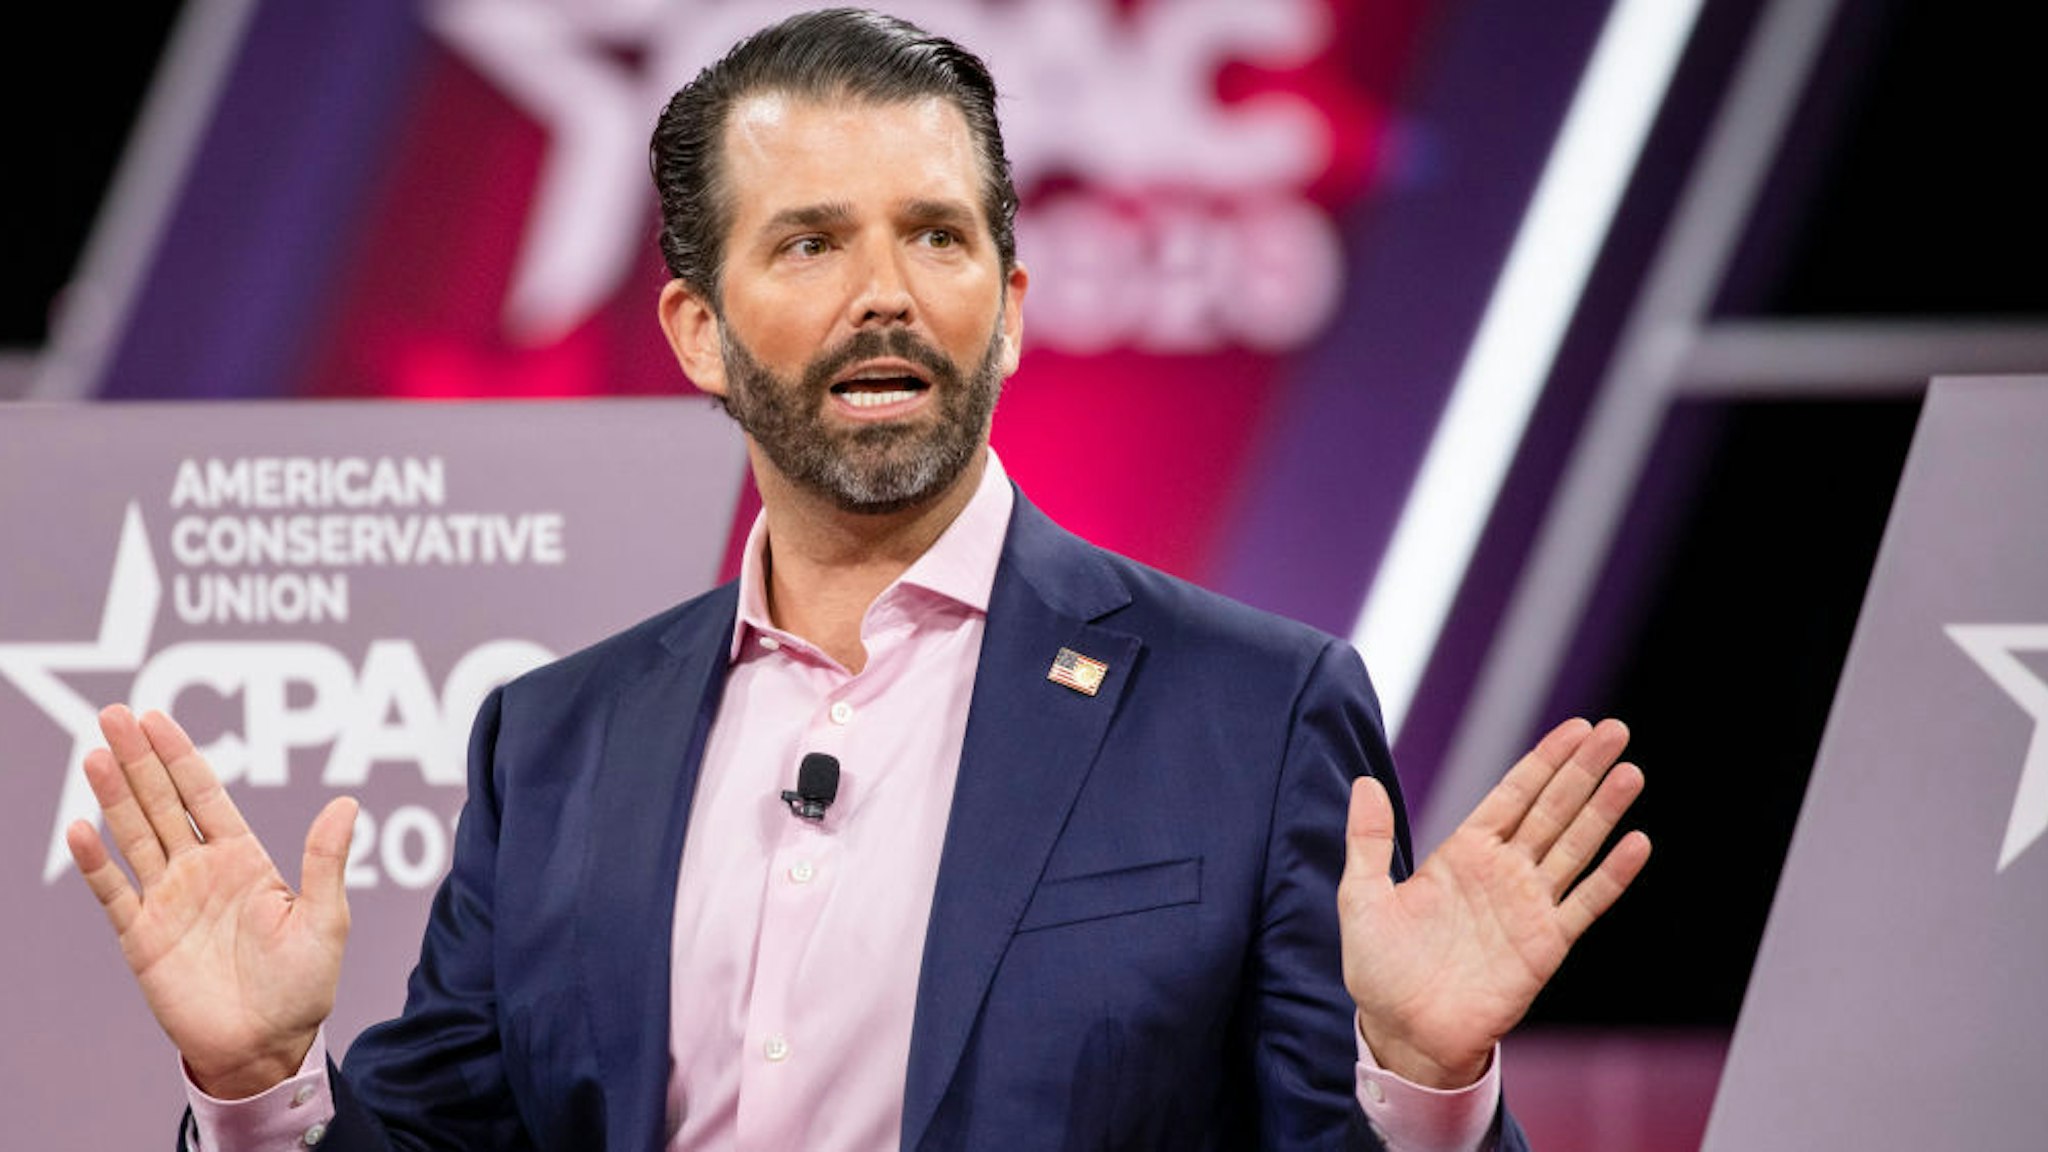 Donald Trump Jr., son of President Donald Trump, speaks on stage during the Conservative Political Action Conference 2020 (CPAC) hosted by the American Conservative Union on February 28, 2020 in National Harbor, MD. (Photo by Samuel Corum/Getty Images)